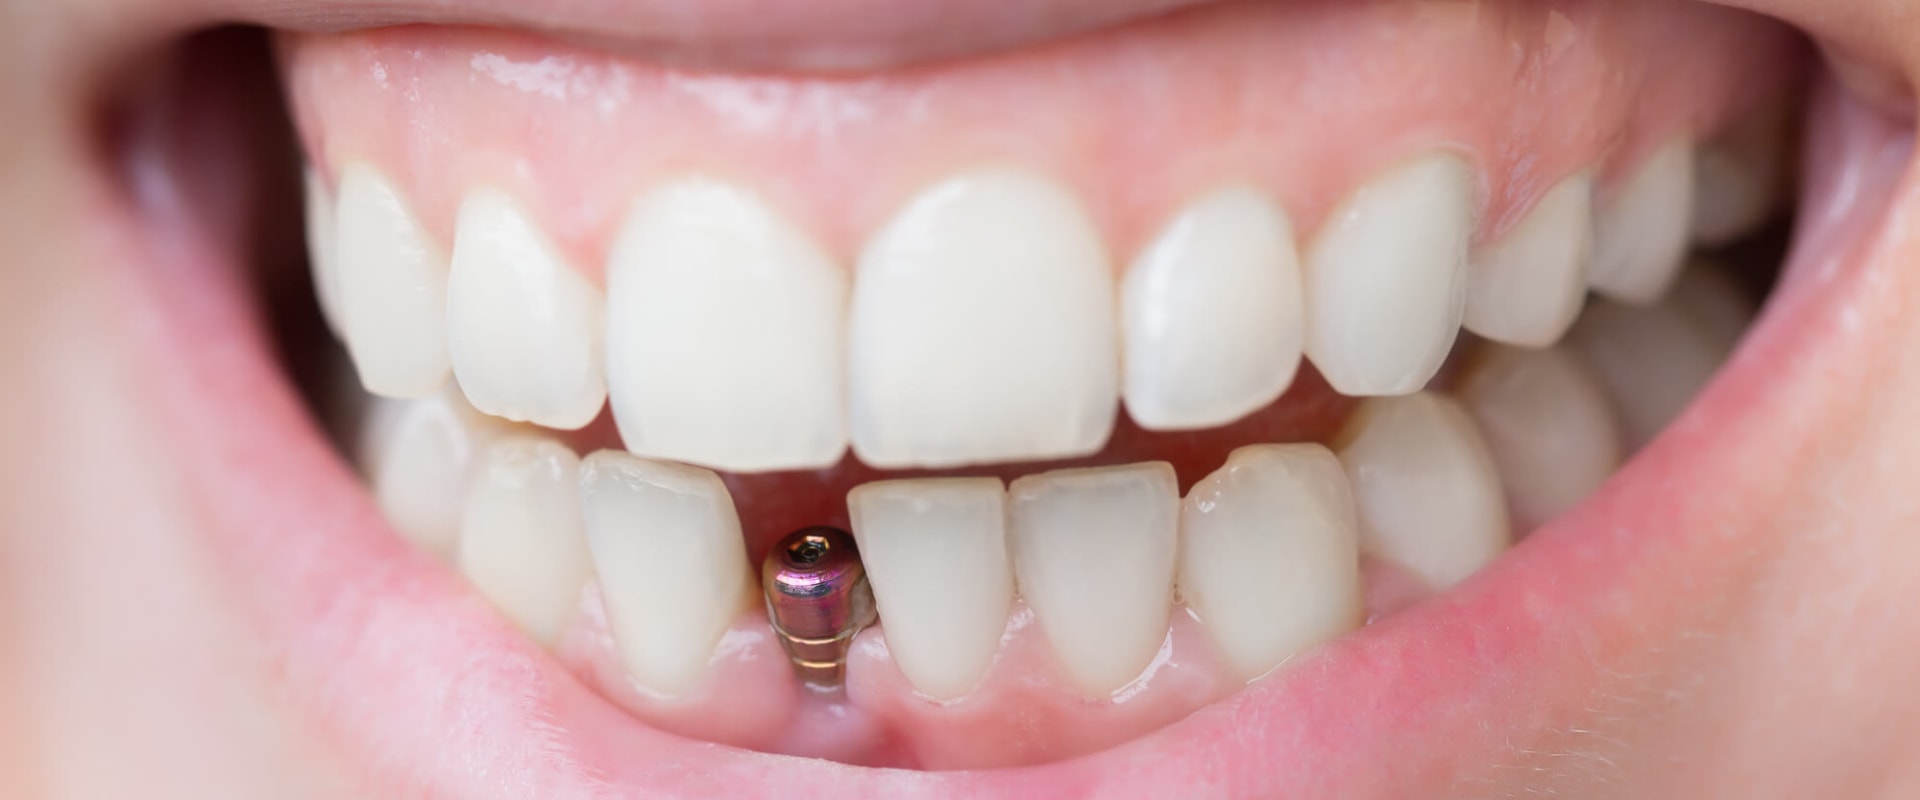 Does insurance cover dental implants?